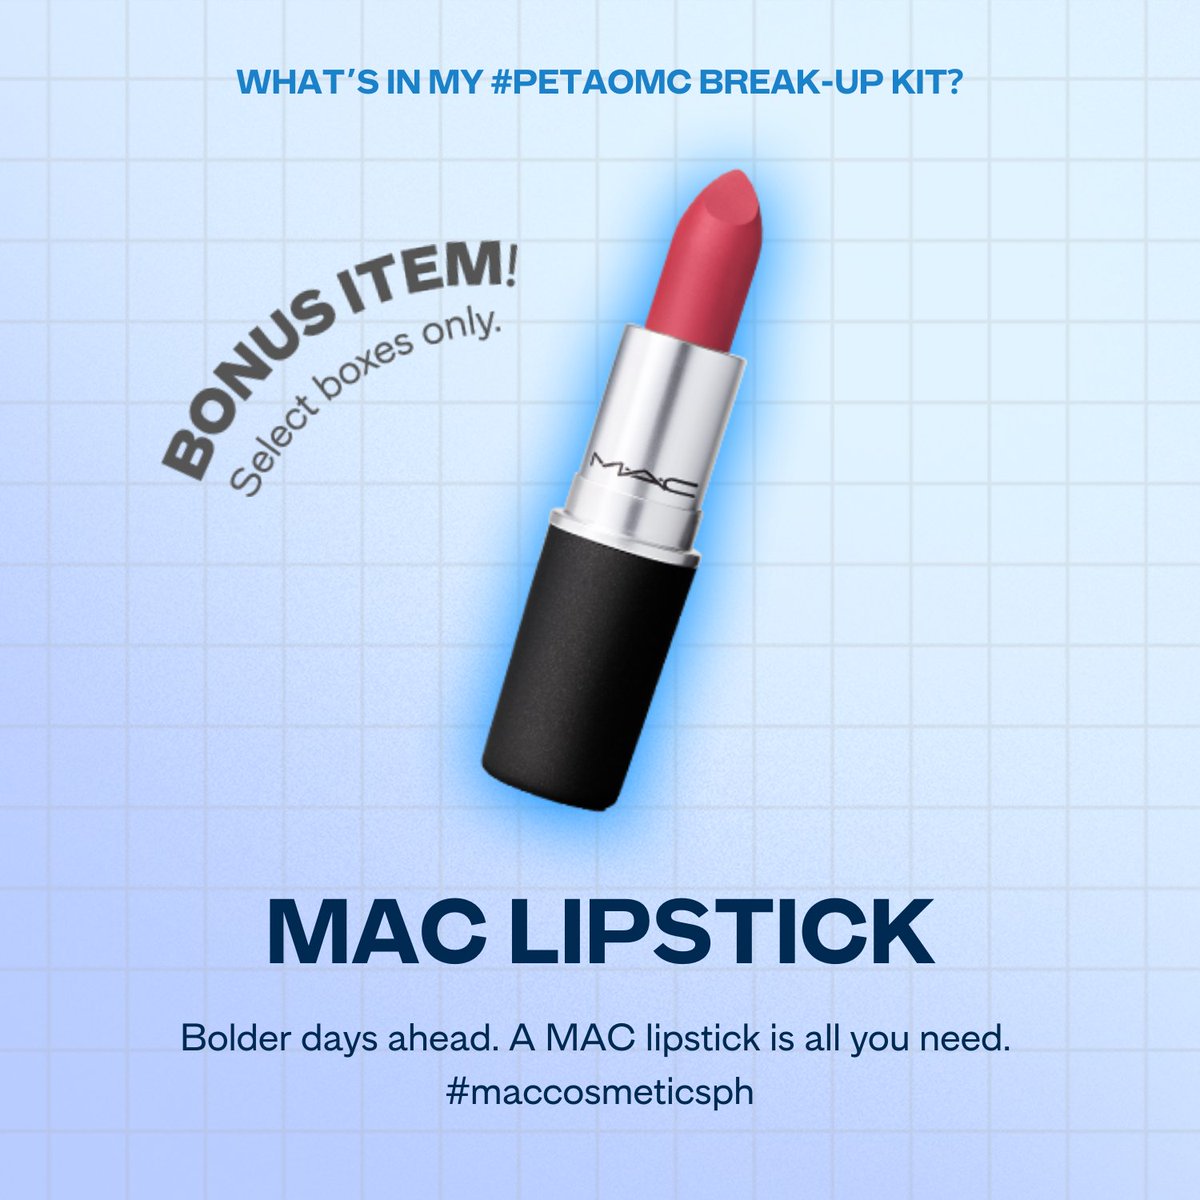 Bounce back from your heartbreak with the exclusive #PETAOneMoreChance Break-up Kit! 📦💙

BONUS ITEM! Select Boxes Only: @MACcosmetics Lipstick 💄